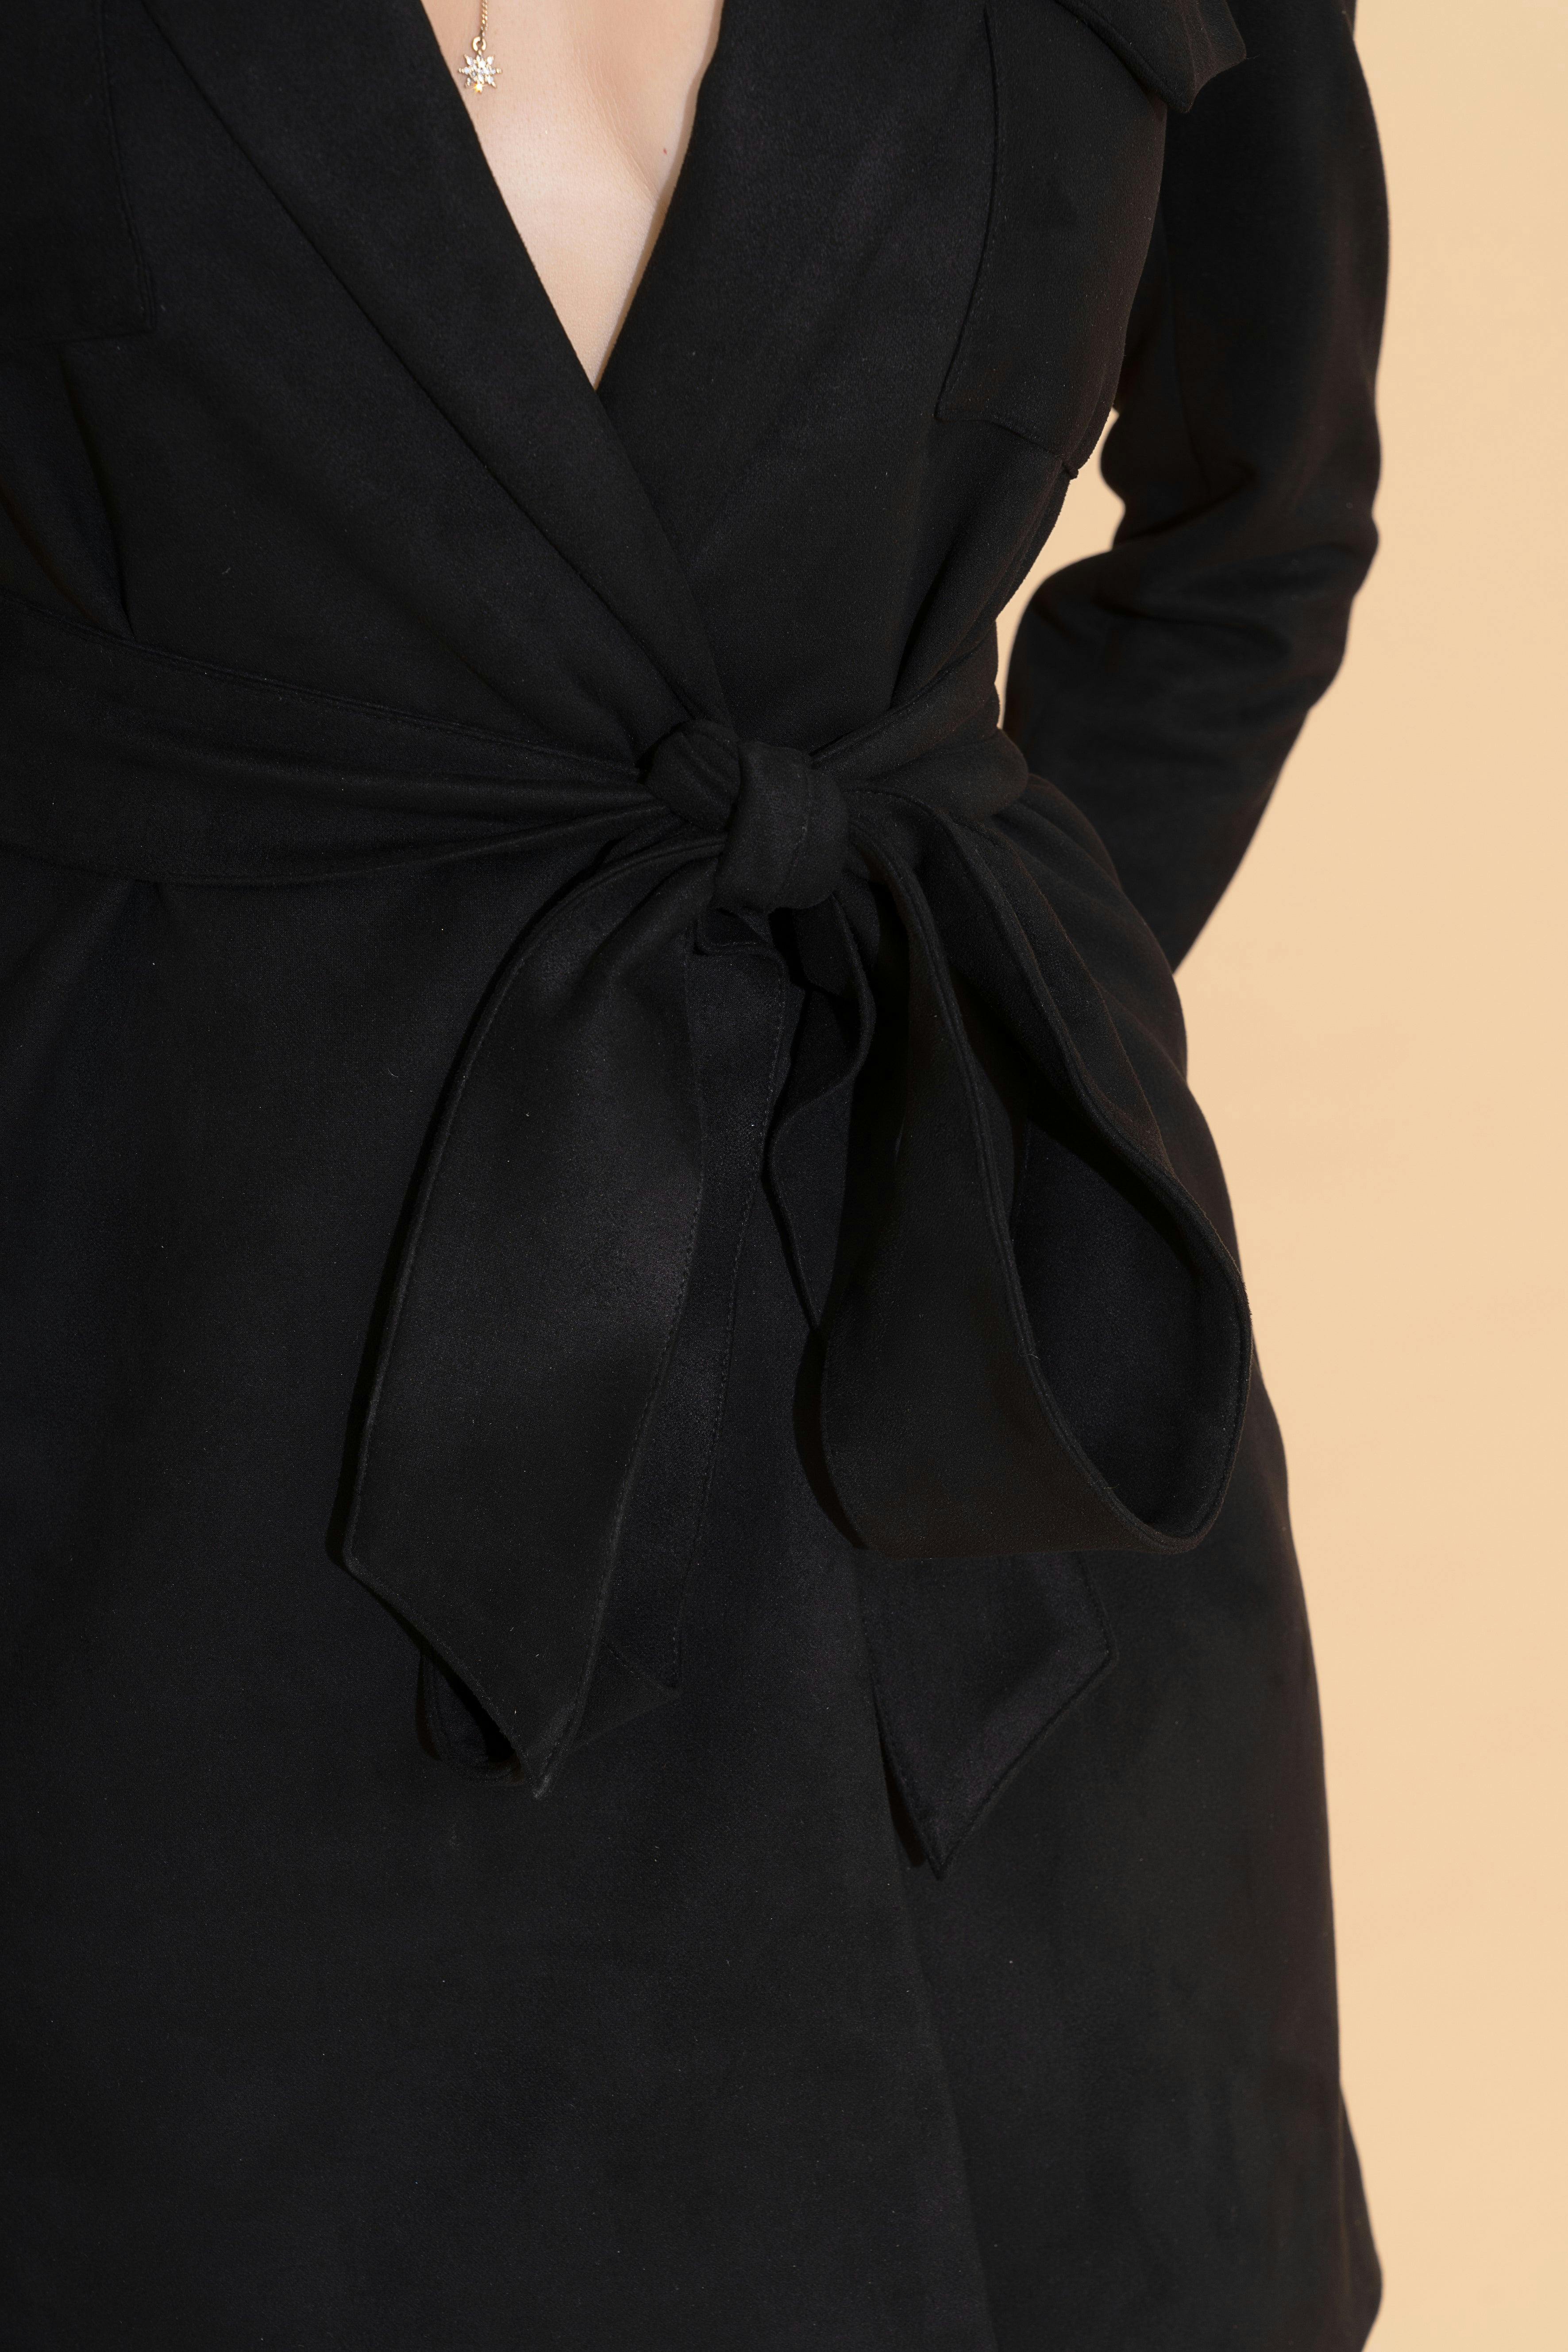 Thumbnail preview #3 for Black Suede Dress